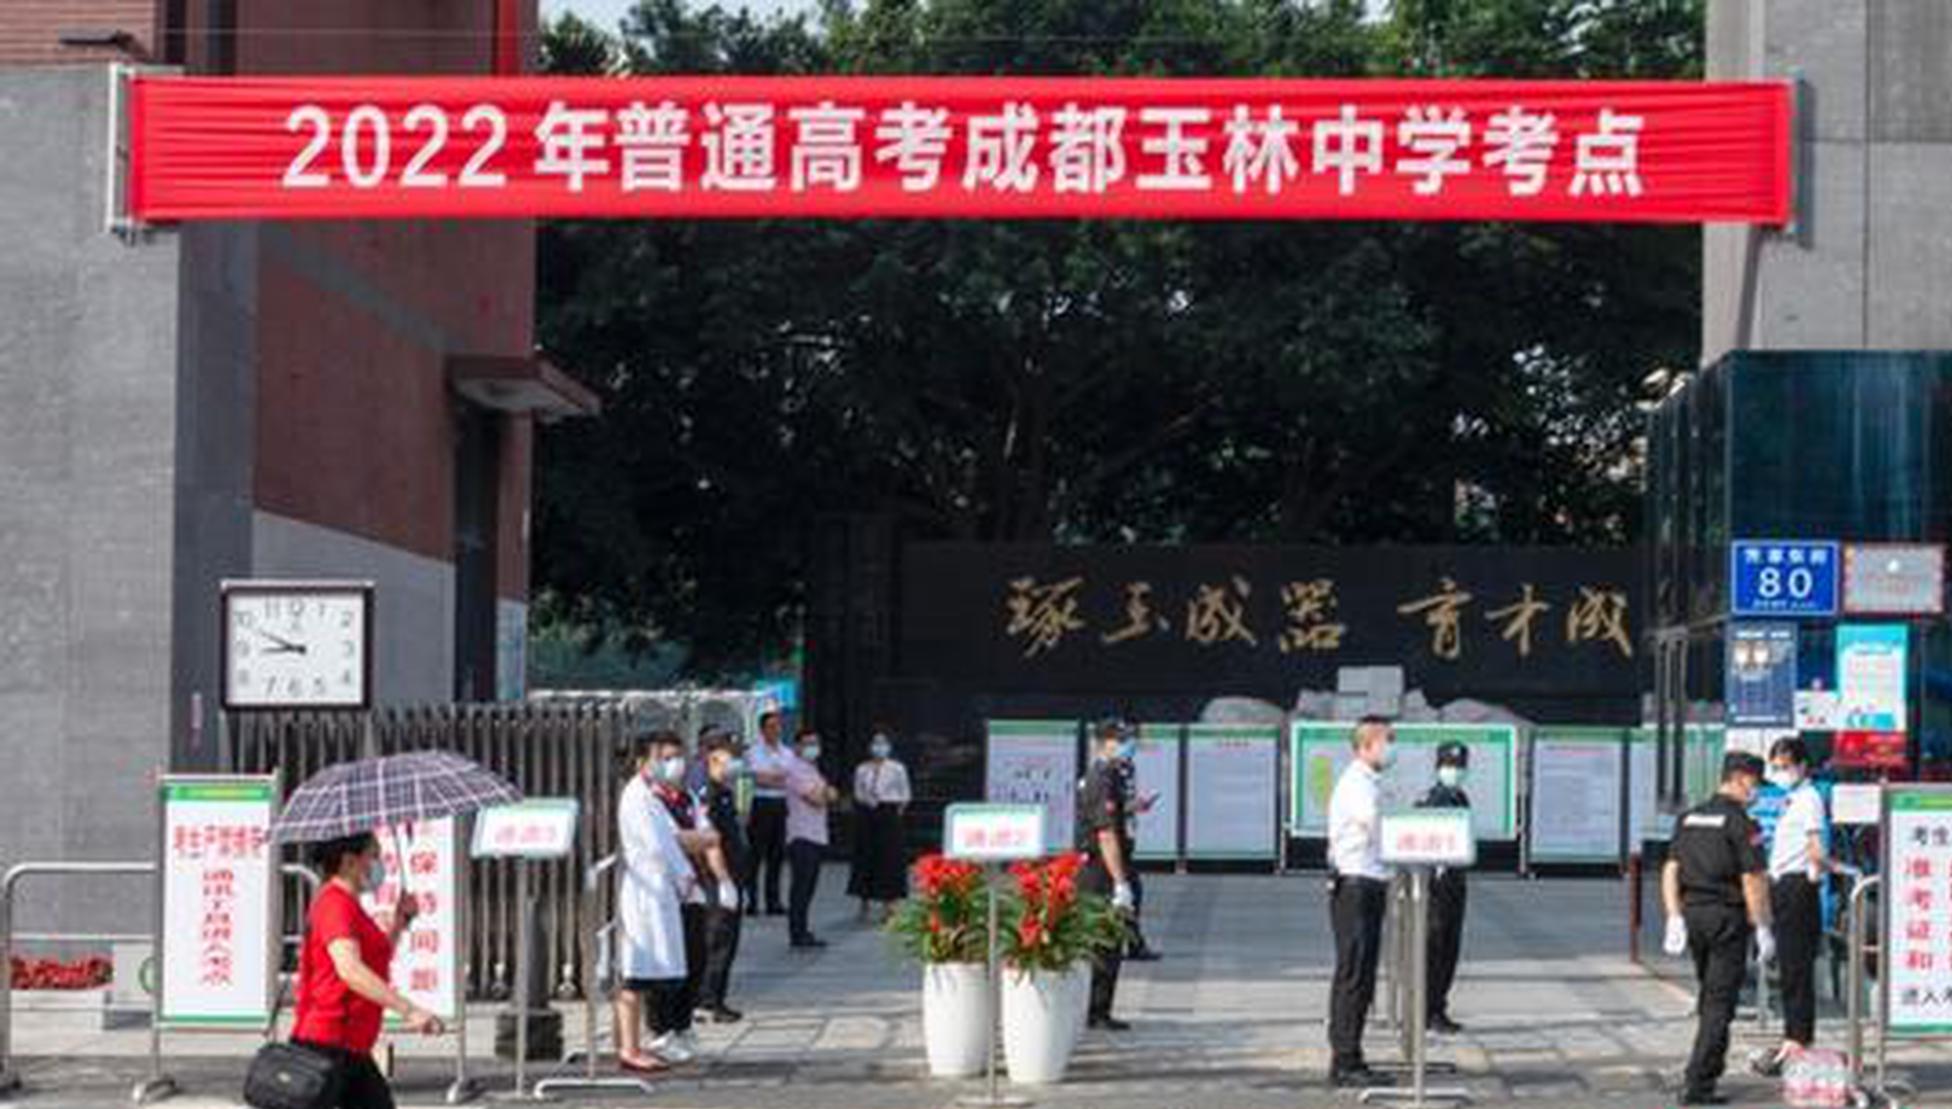 China's 2022 college entrance exam begins as scheduled